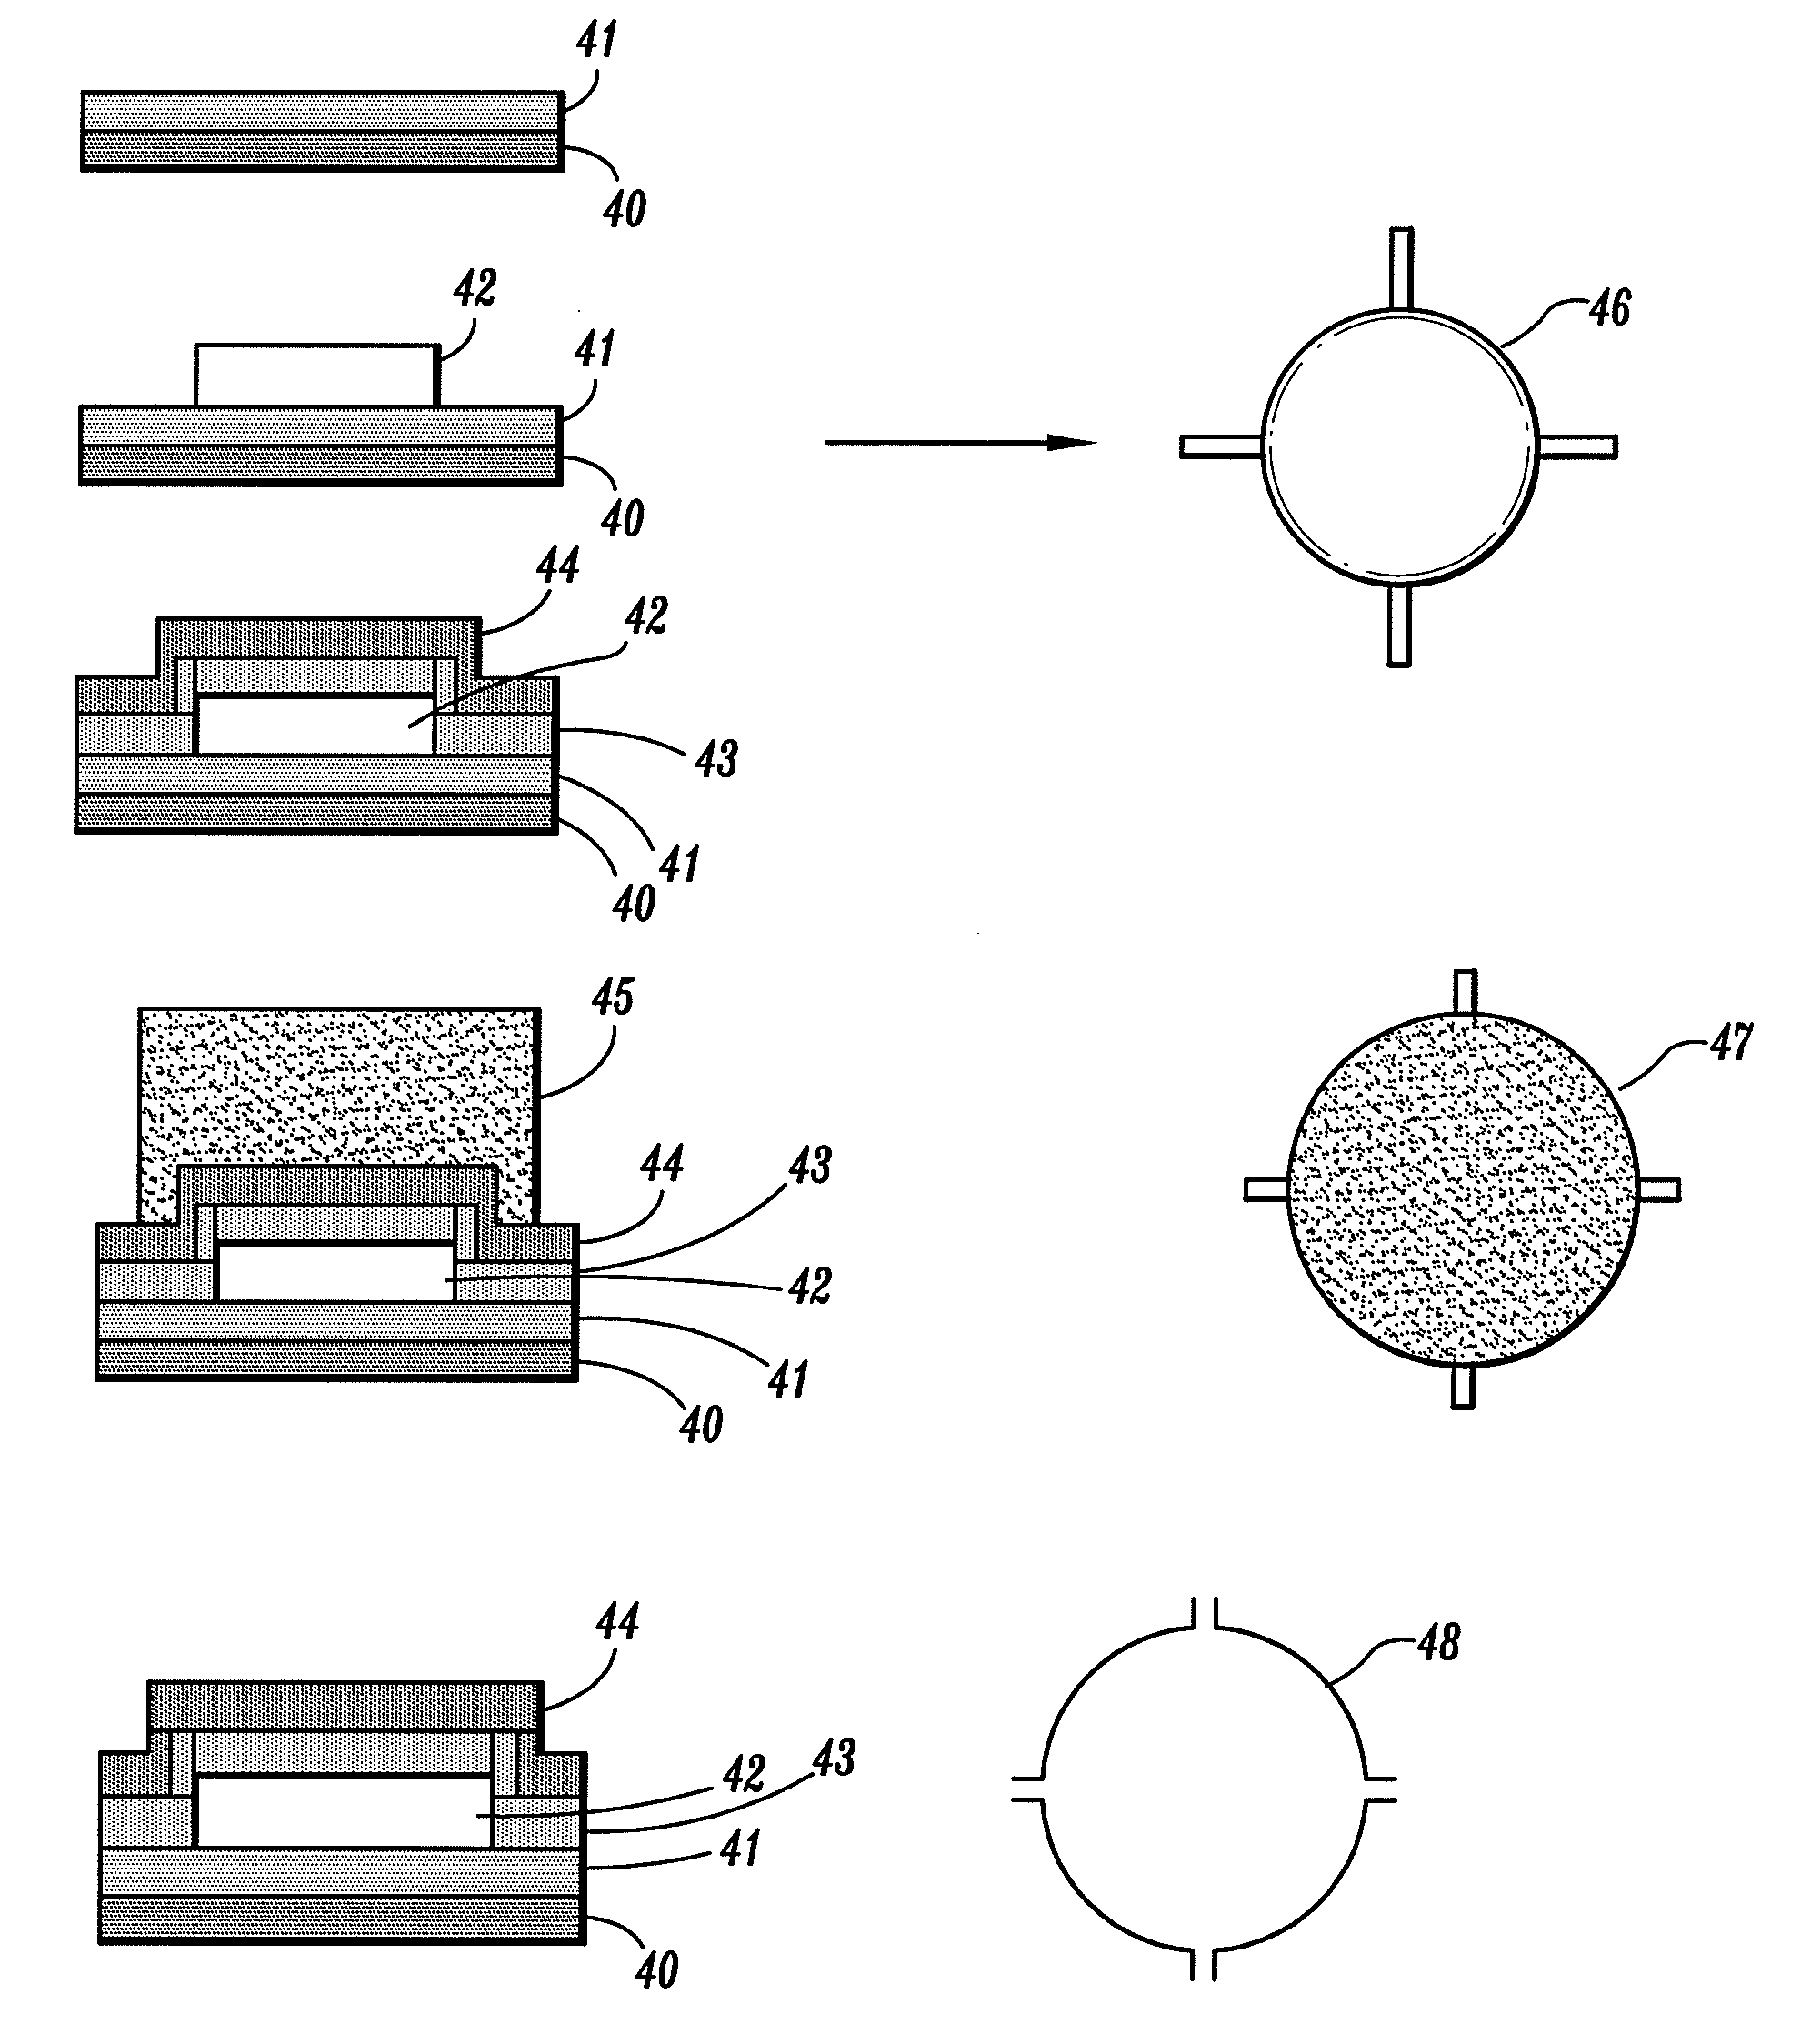 Negative thermal expansion system (NTEs) device for TCE compensation in elastomer composites and conductive elastomer interconnects in microelectronic packaging